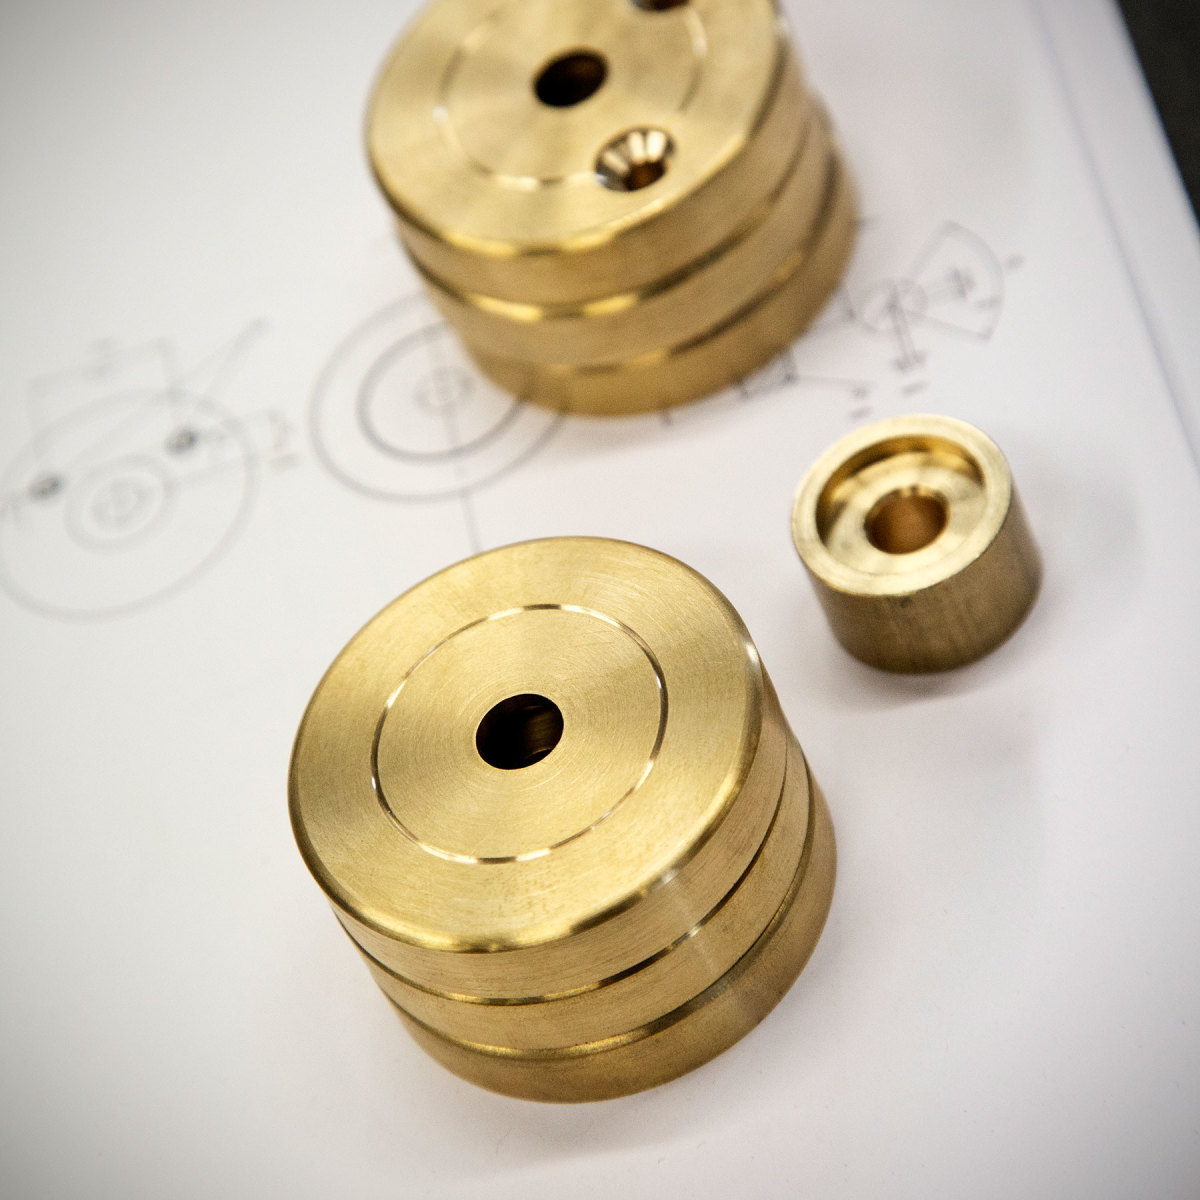  Brass inner components ready for assembly